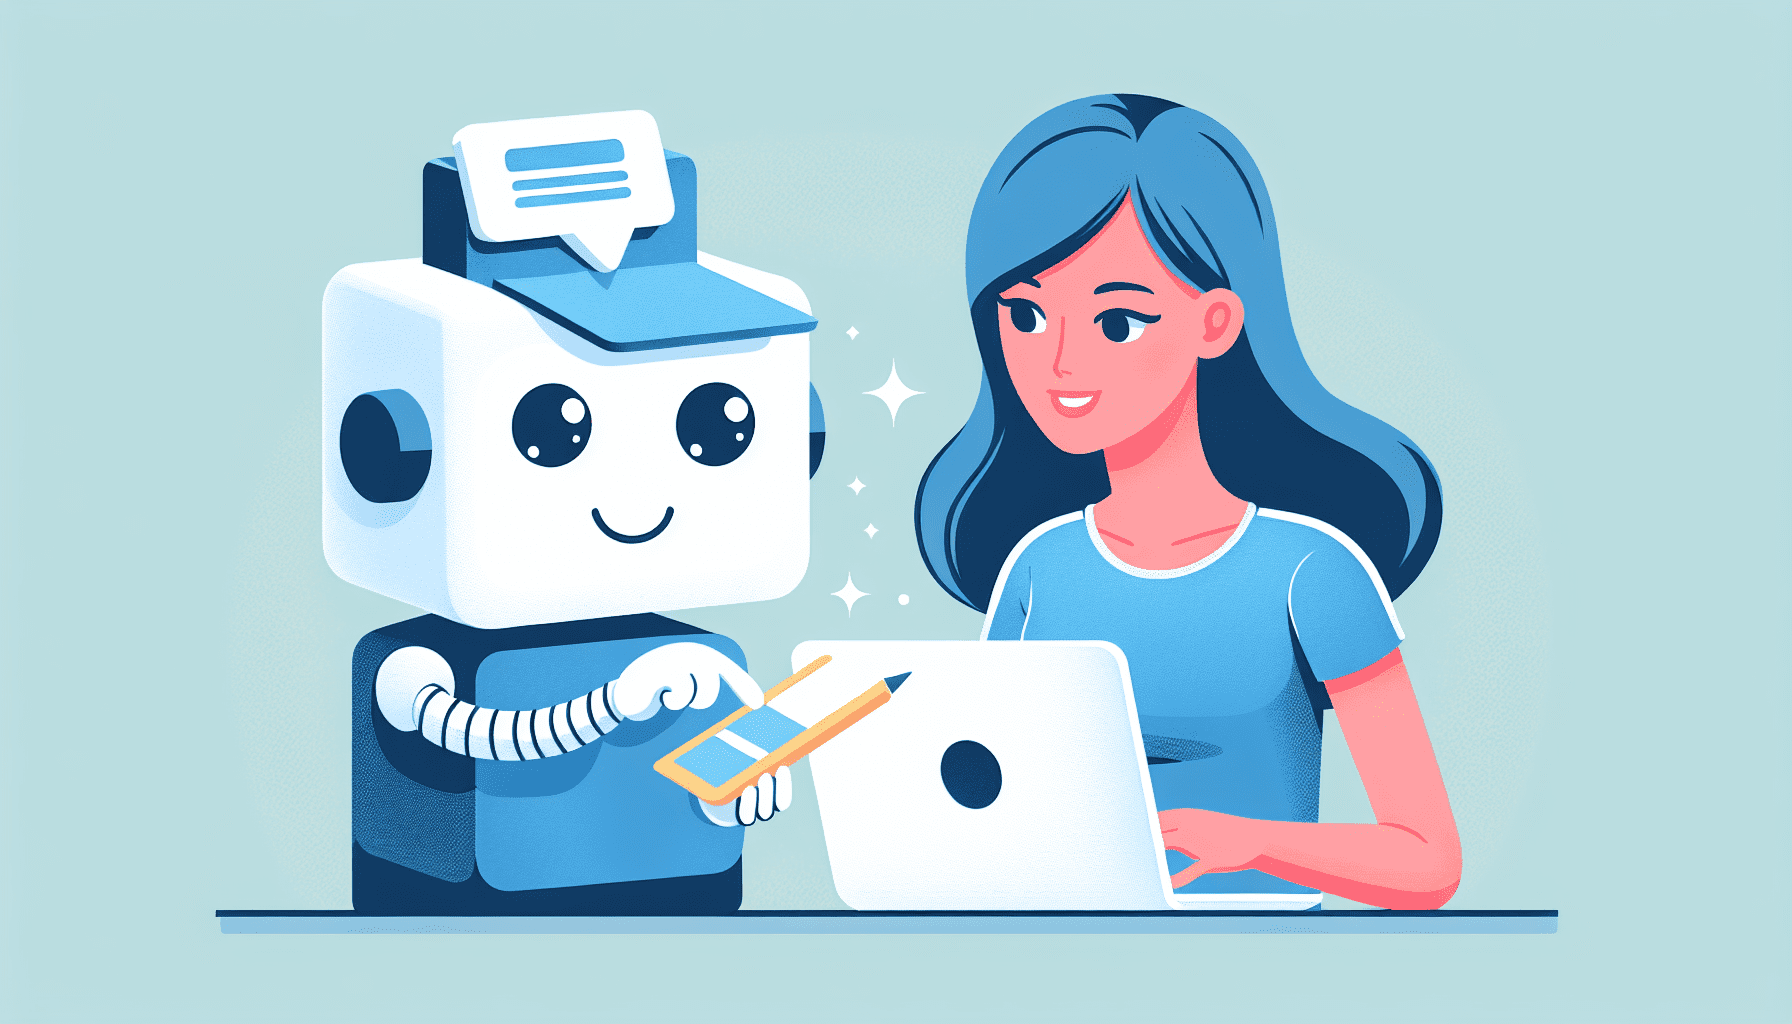 A friendly chatbot wearing a square hat helps a person build a website on a laptop.